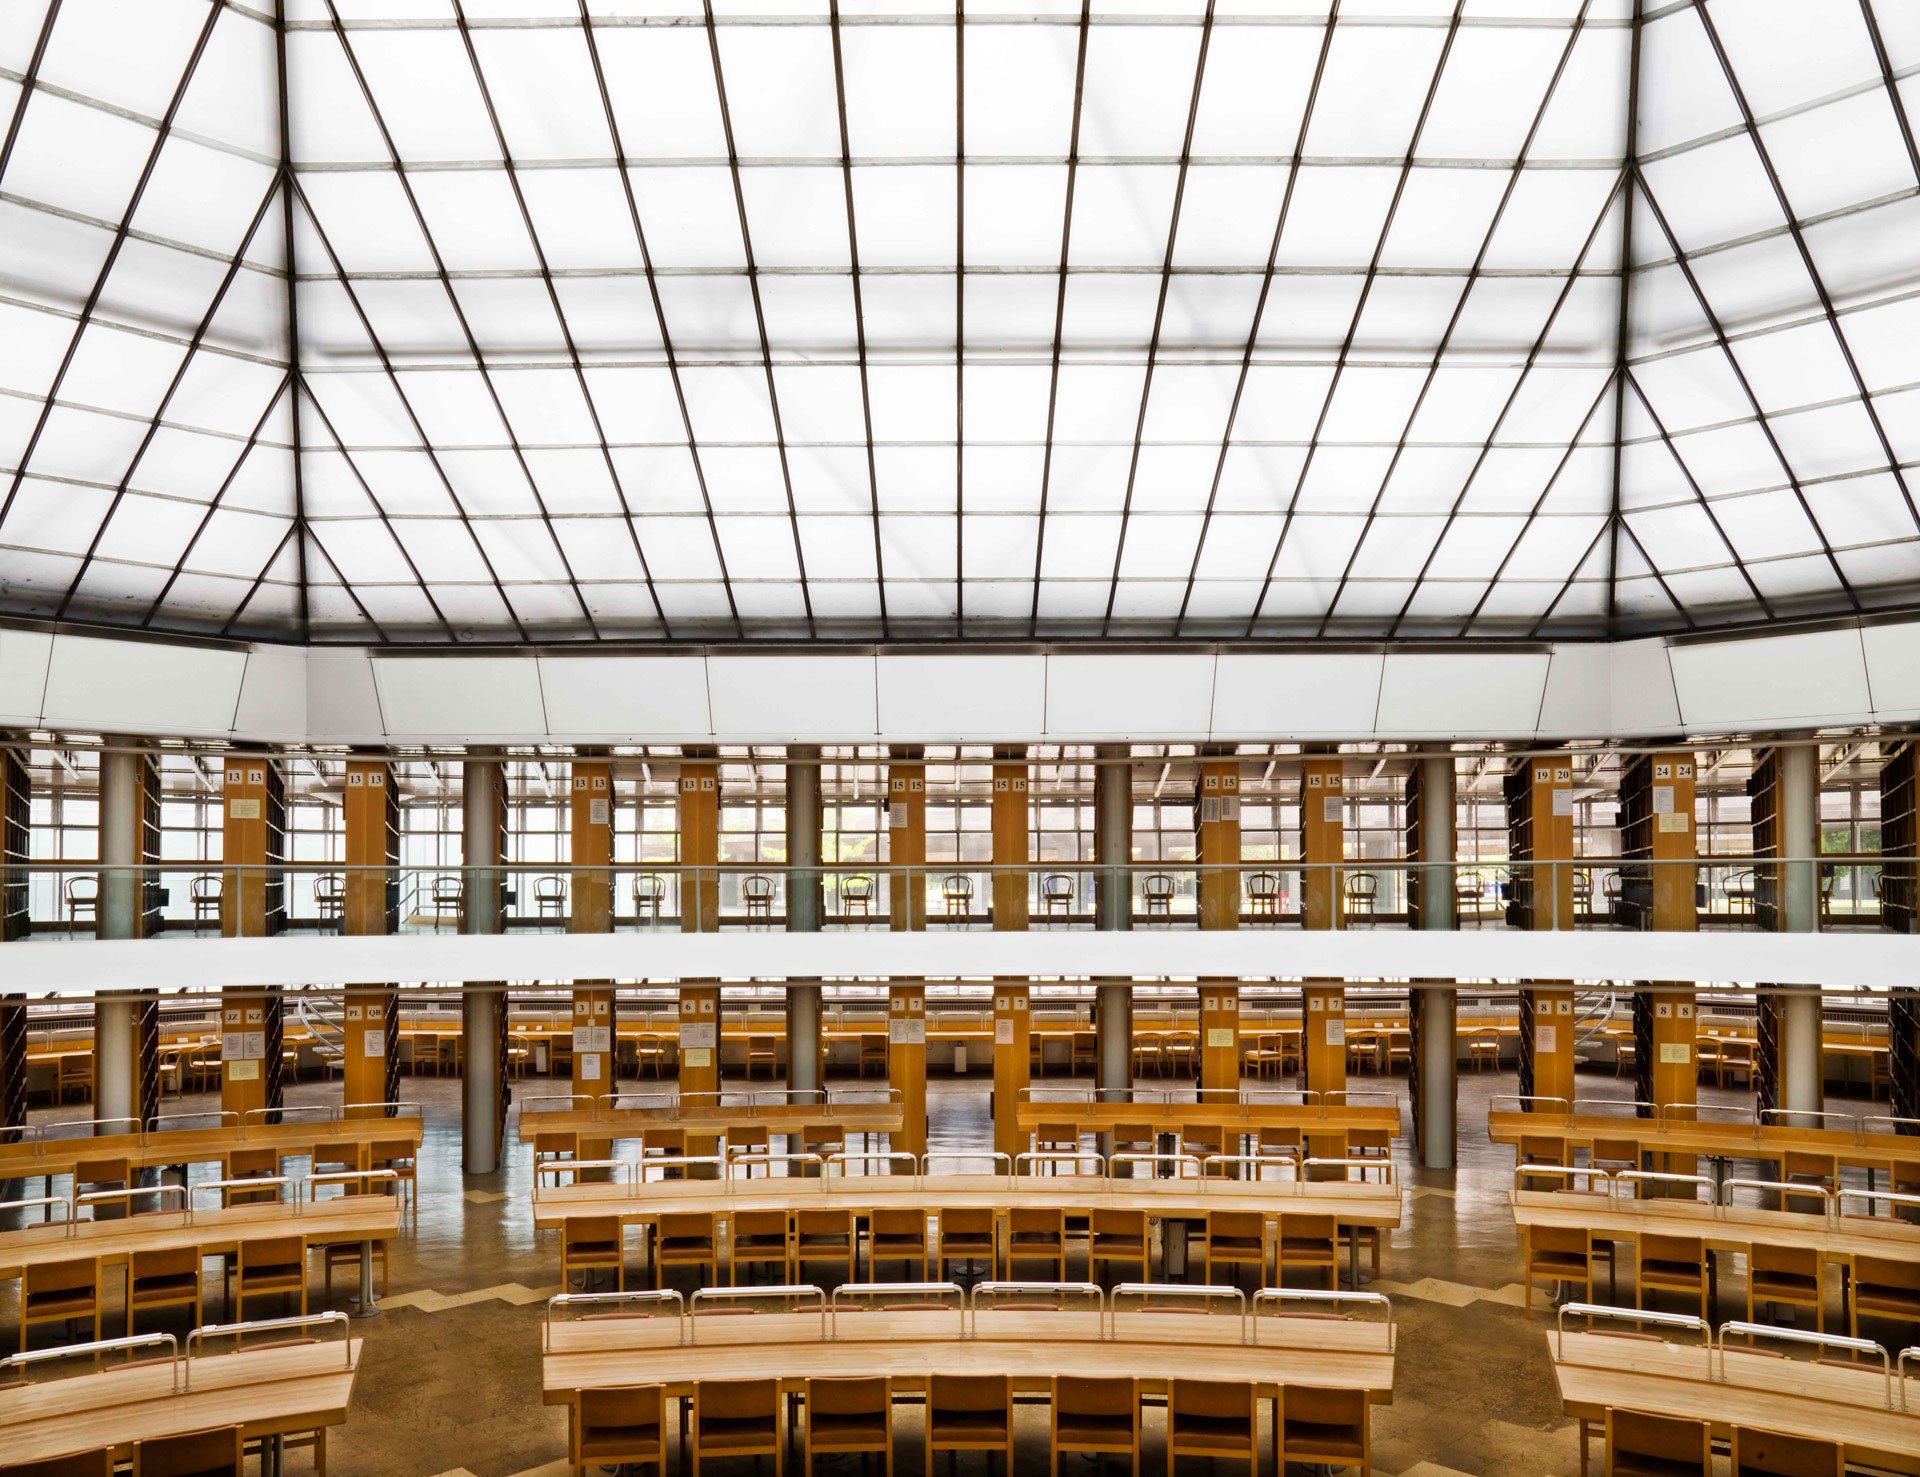 Wide interior view of library